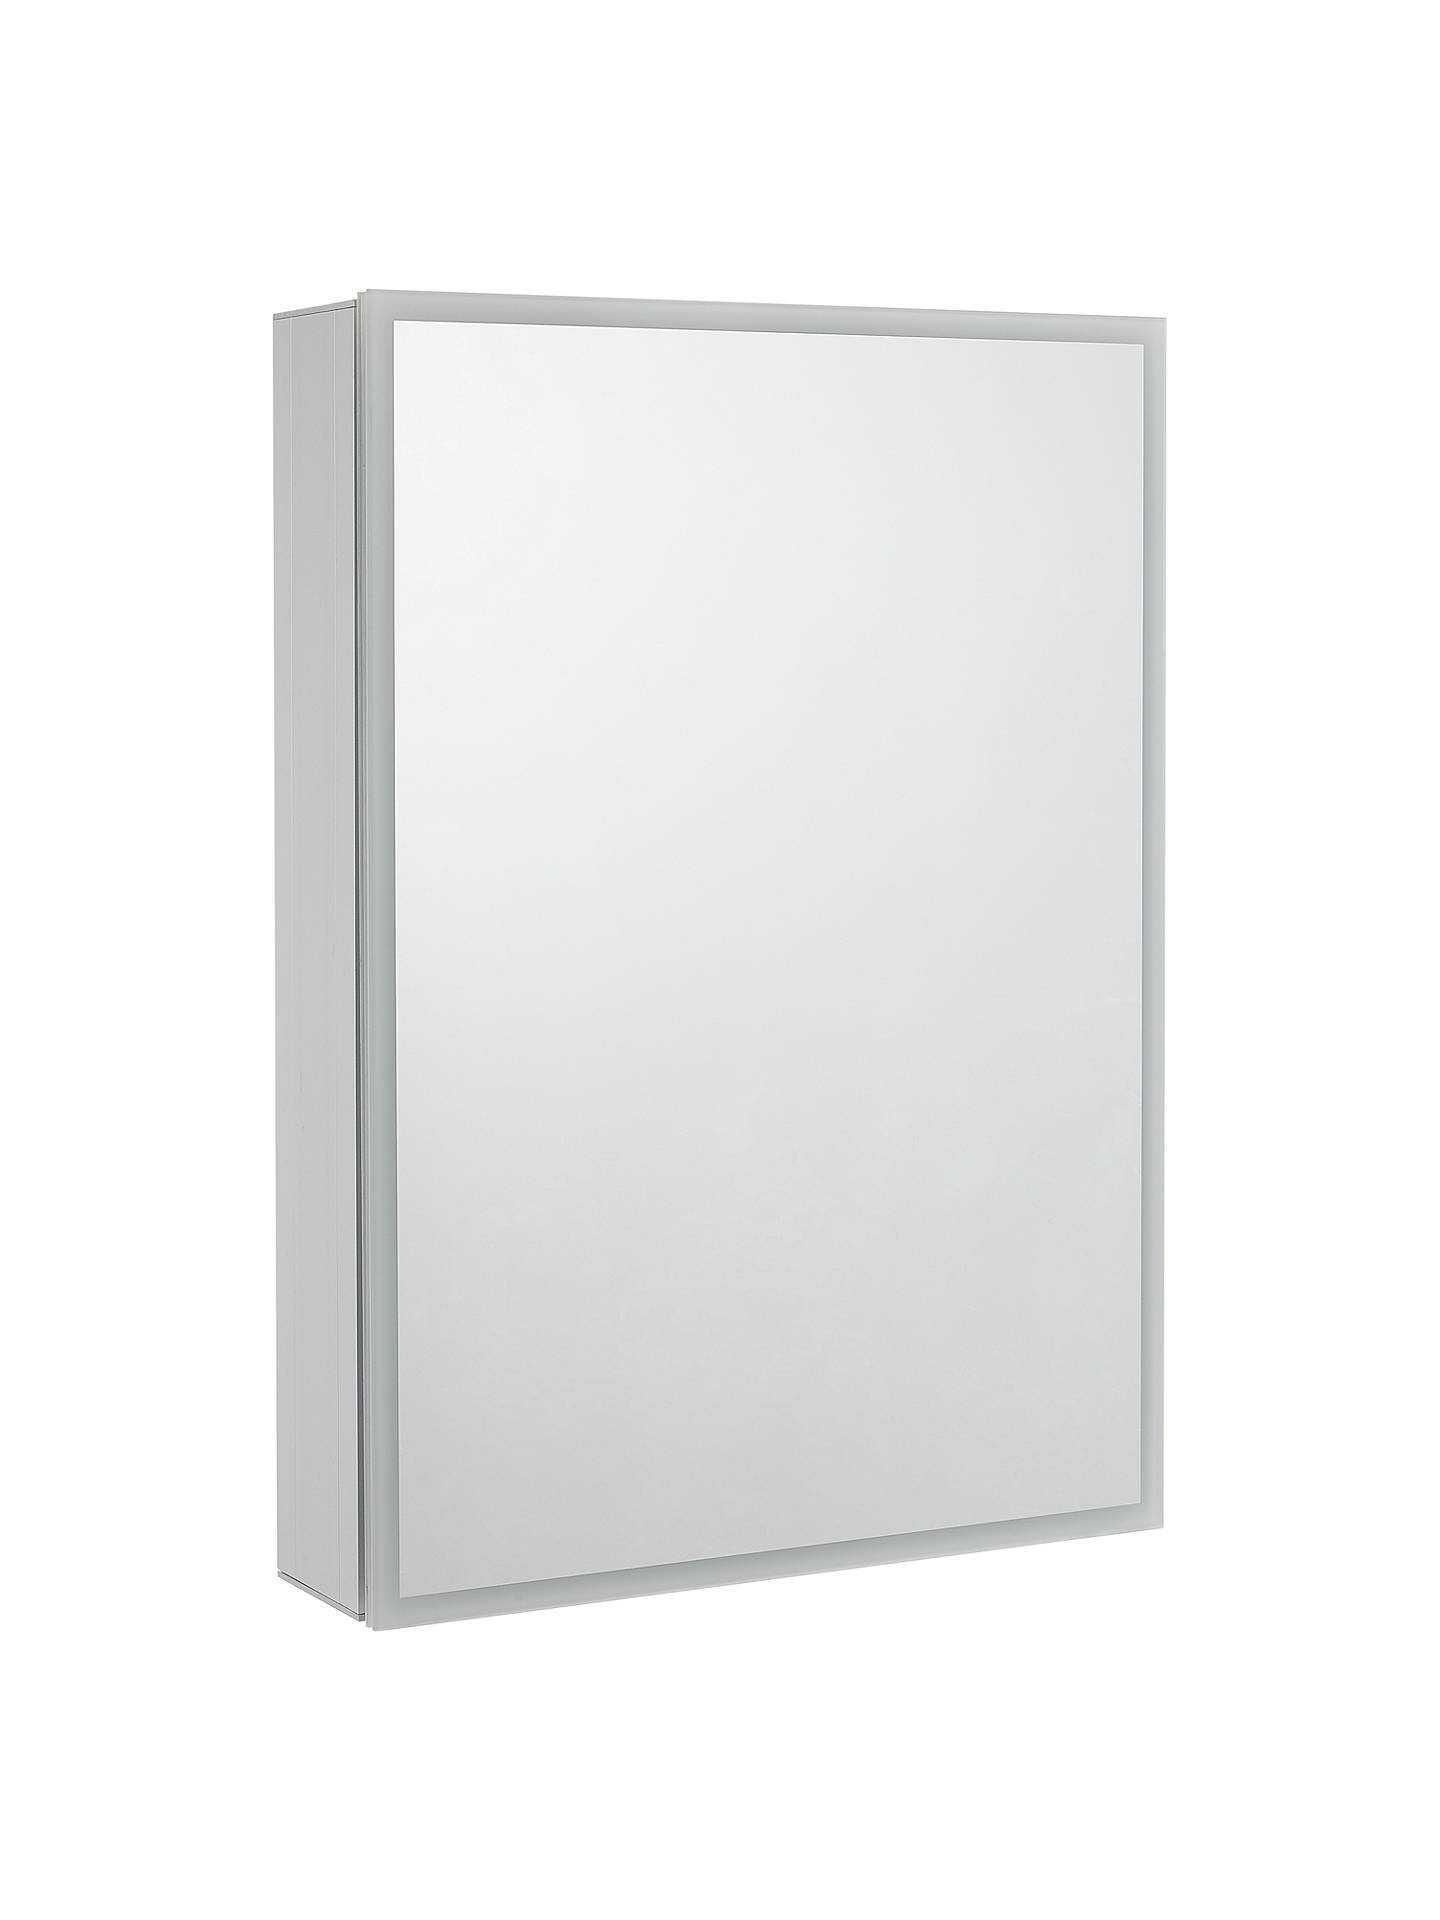 RRP £495 Boxed Outline Single Cabinet - Image 2 of 2